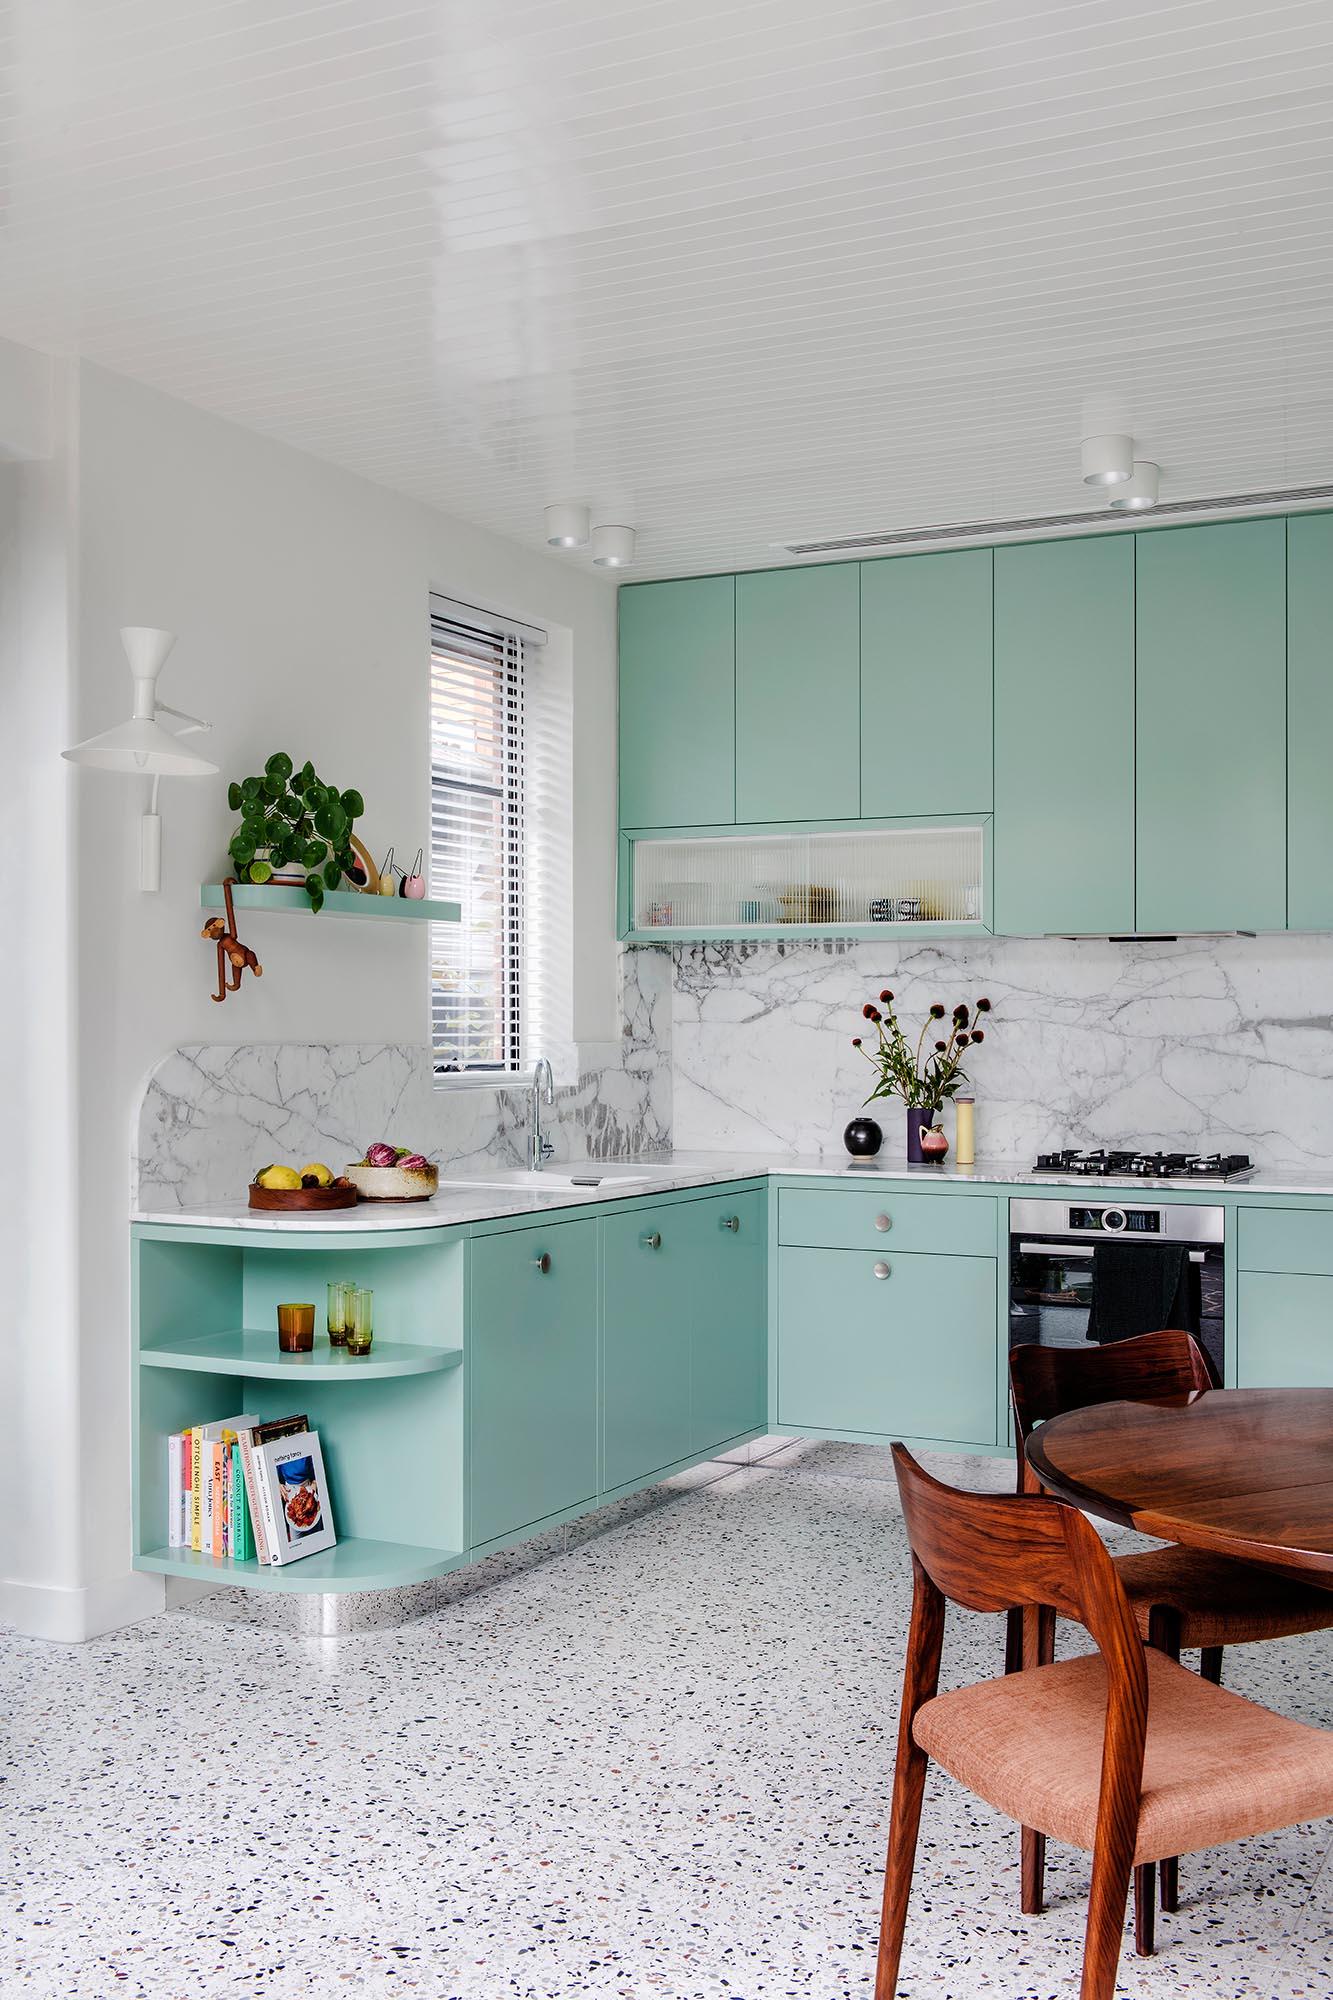 A modern mint green kitchen with Calacatta Statuario countertops, Terrazzo flooring, and white walls and ceiling.